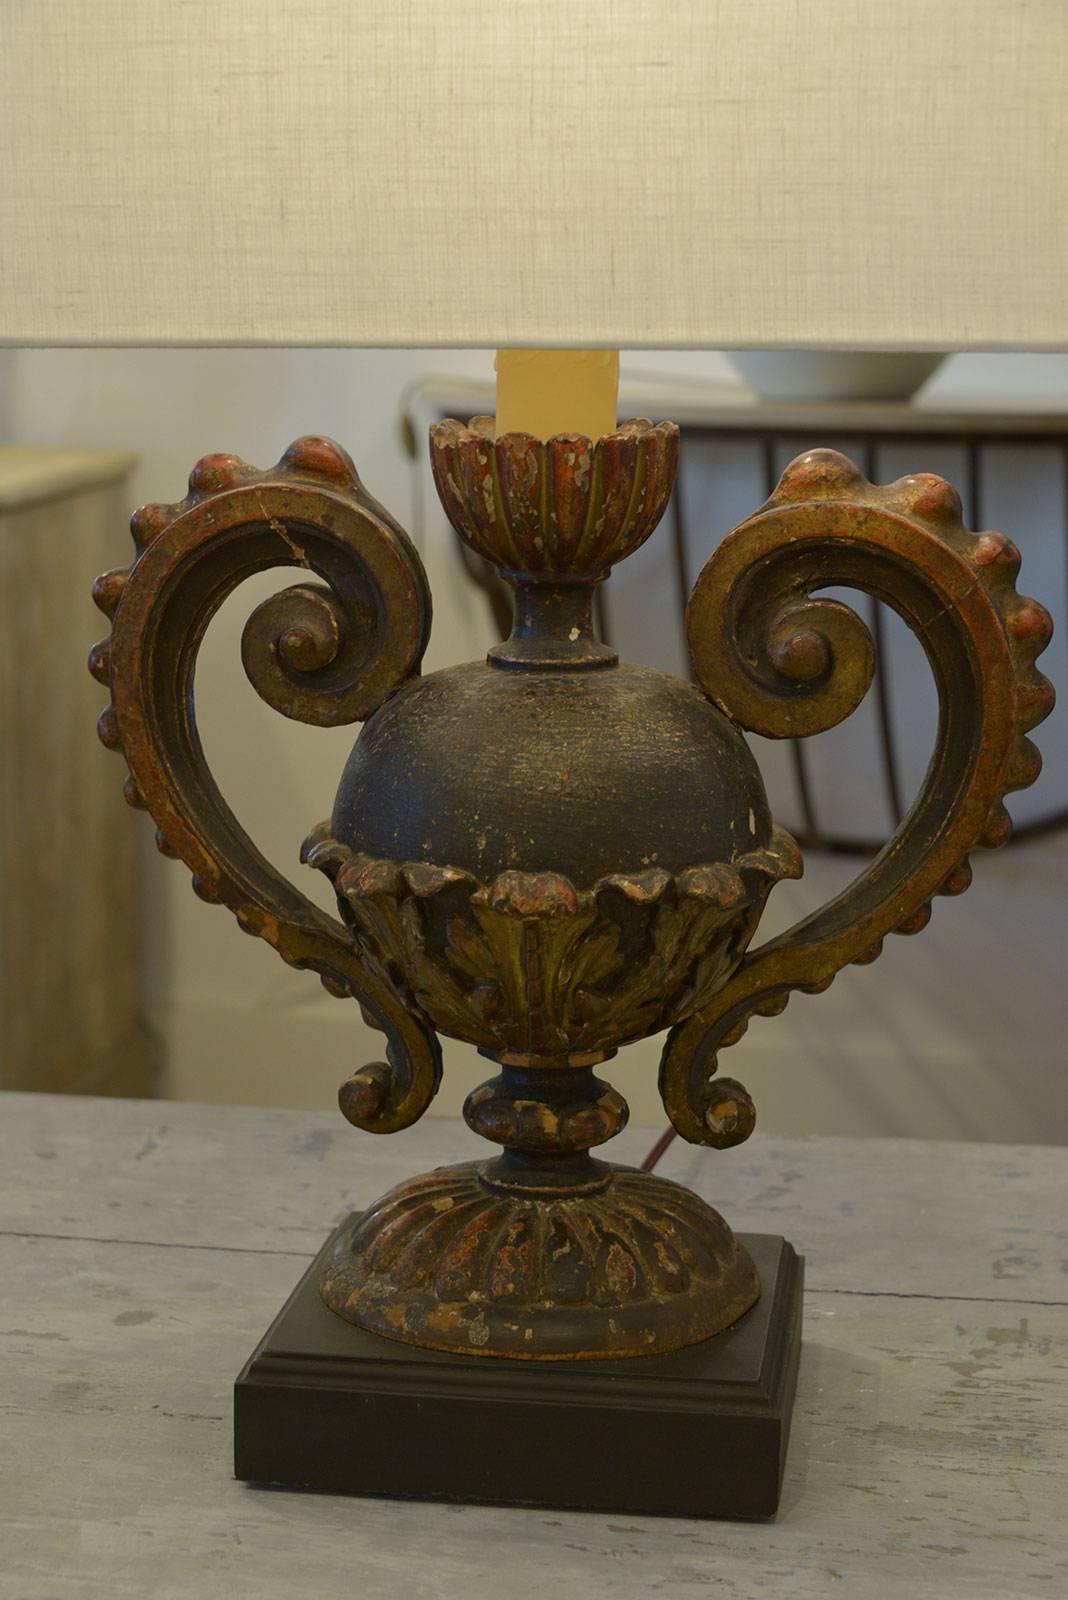 18th century Italian urn-shape architectural fragment mounted on base and newly wired as custom table lamp with linen shade.